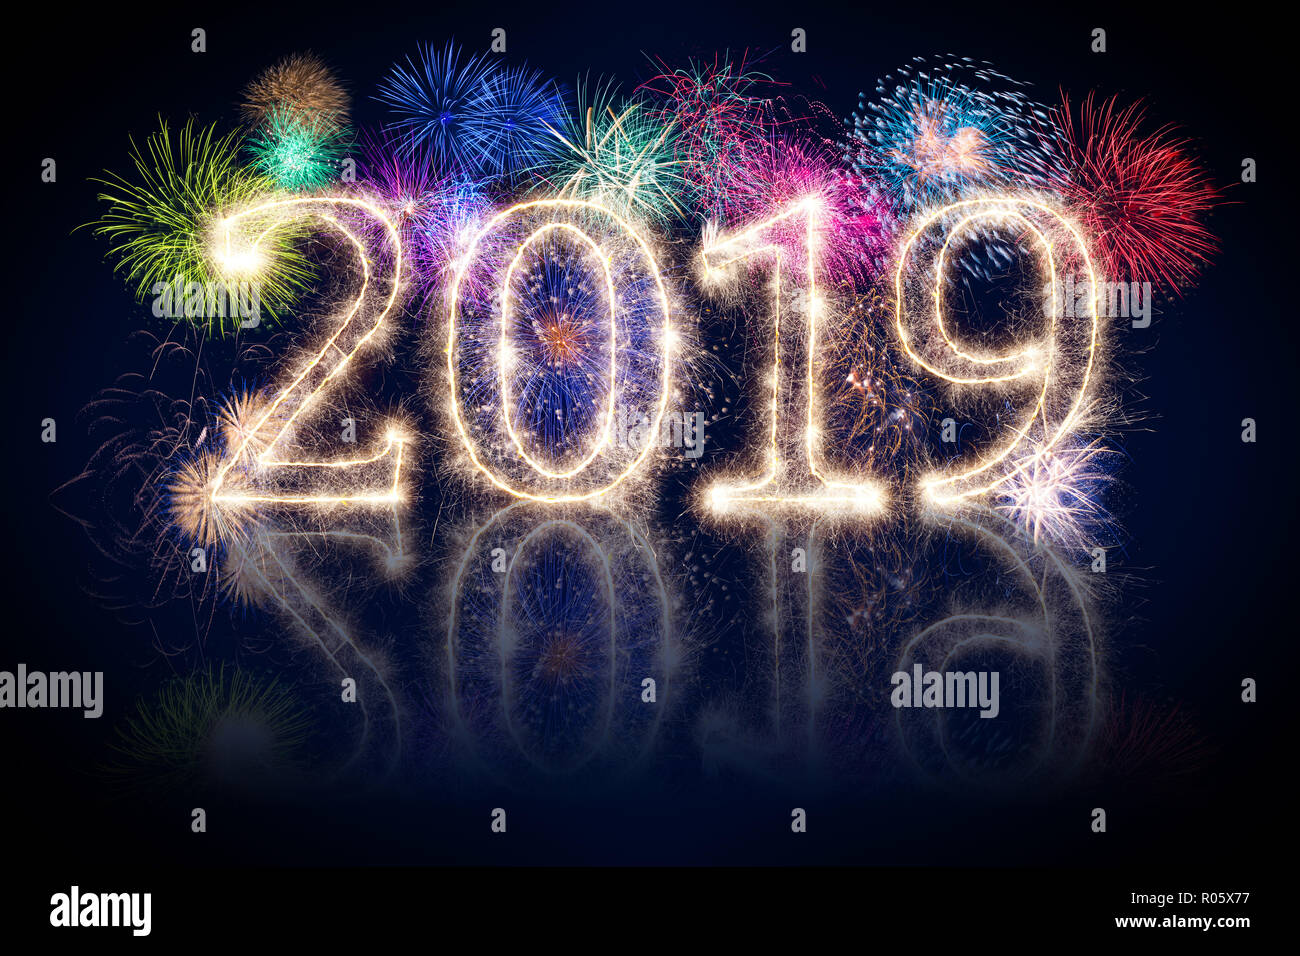 colorful fireworks display and bright sparkler pyrotechnic number 2019 happy new year sylvester concept on black blue background Stock Photo